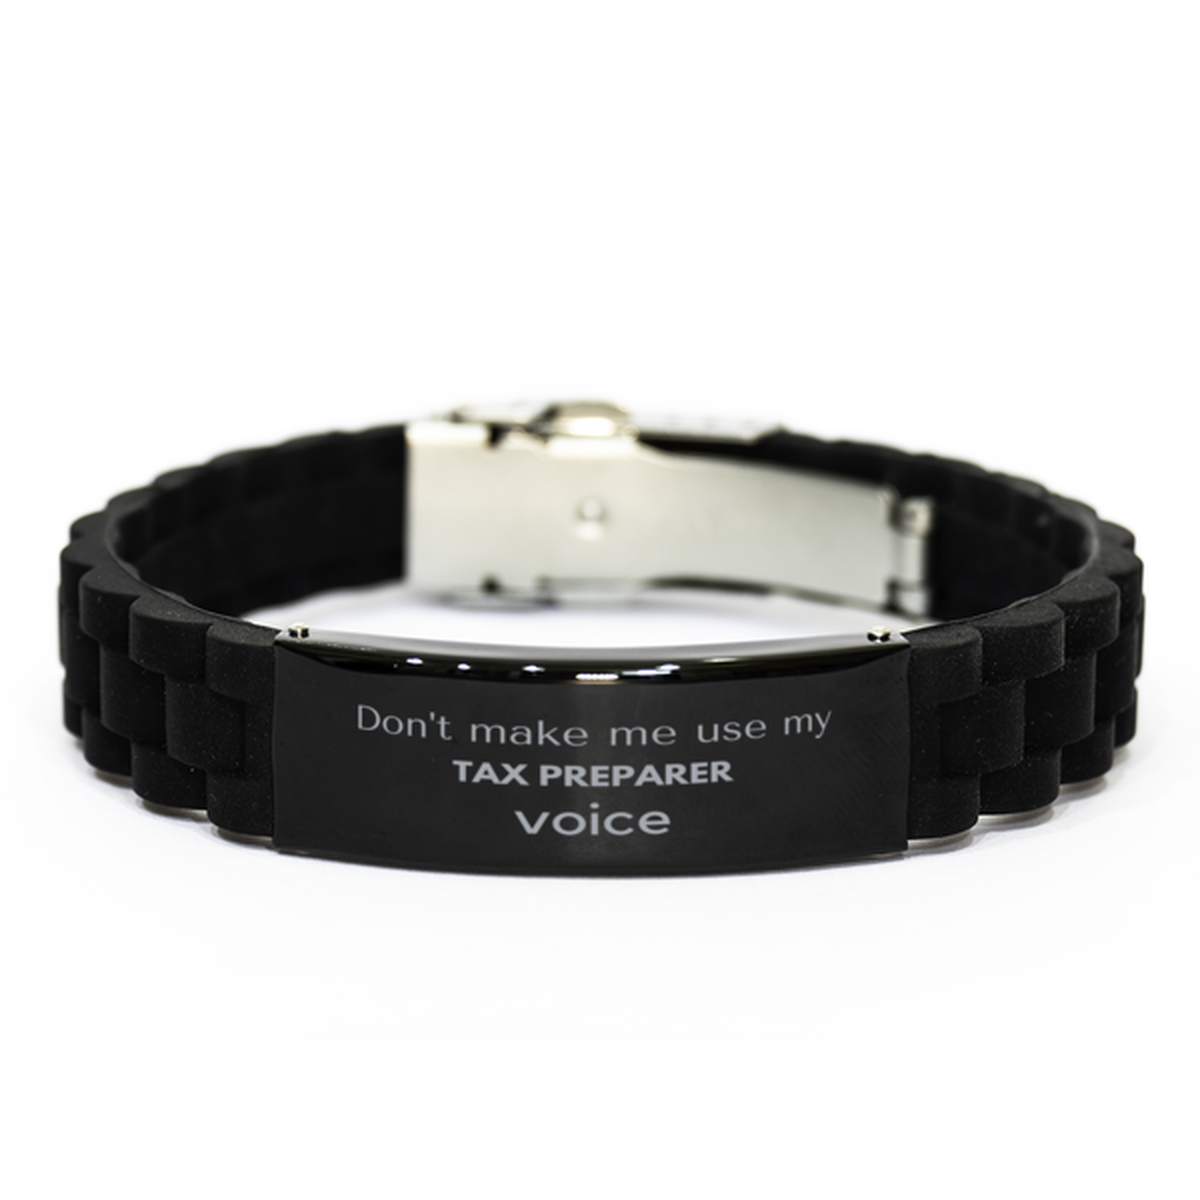 Don't make me use my Tax Preparer voice, Sarcasm Tax Preparer Gifts, Christmas Tax Preparer Black Glidelock Clasp Bracelet Birthday Unique Gifts For Tax Preparer Coworkers, Men, Women, Colleague, Friends